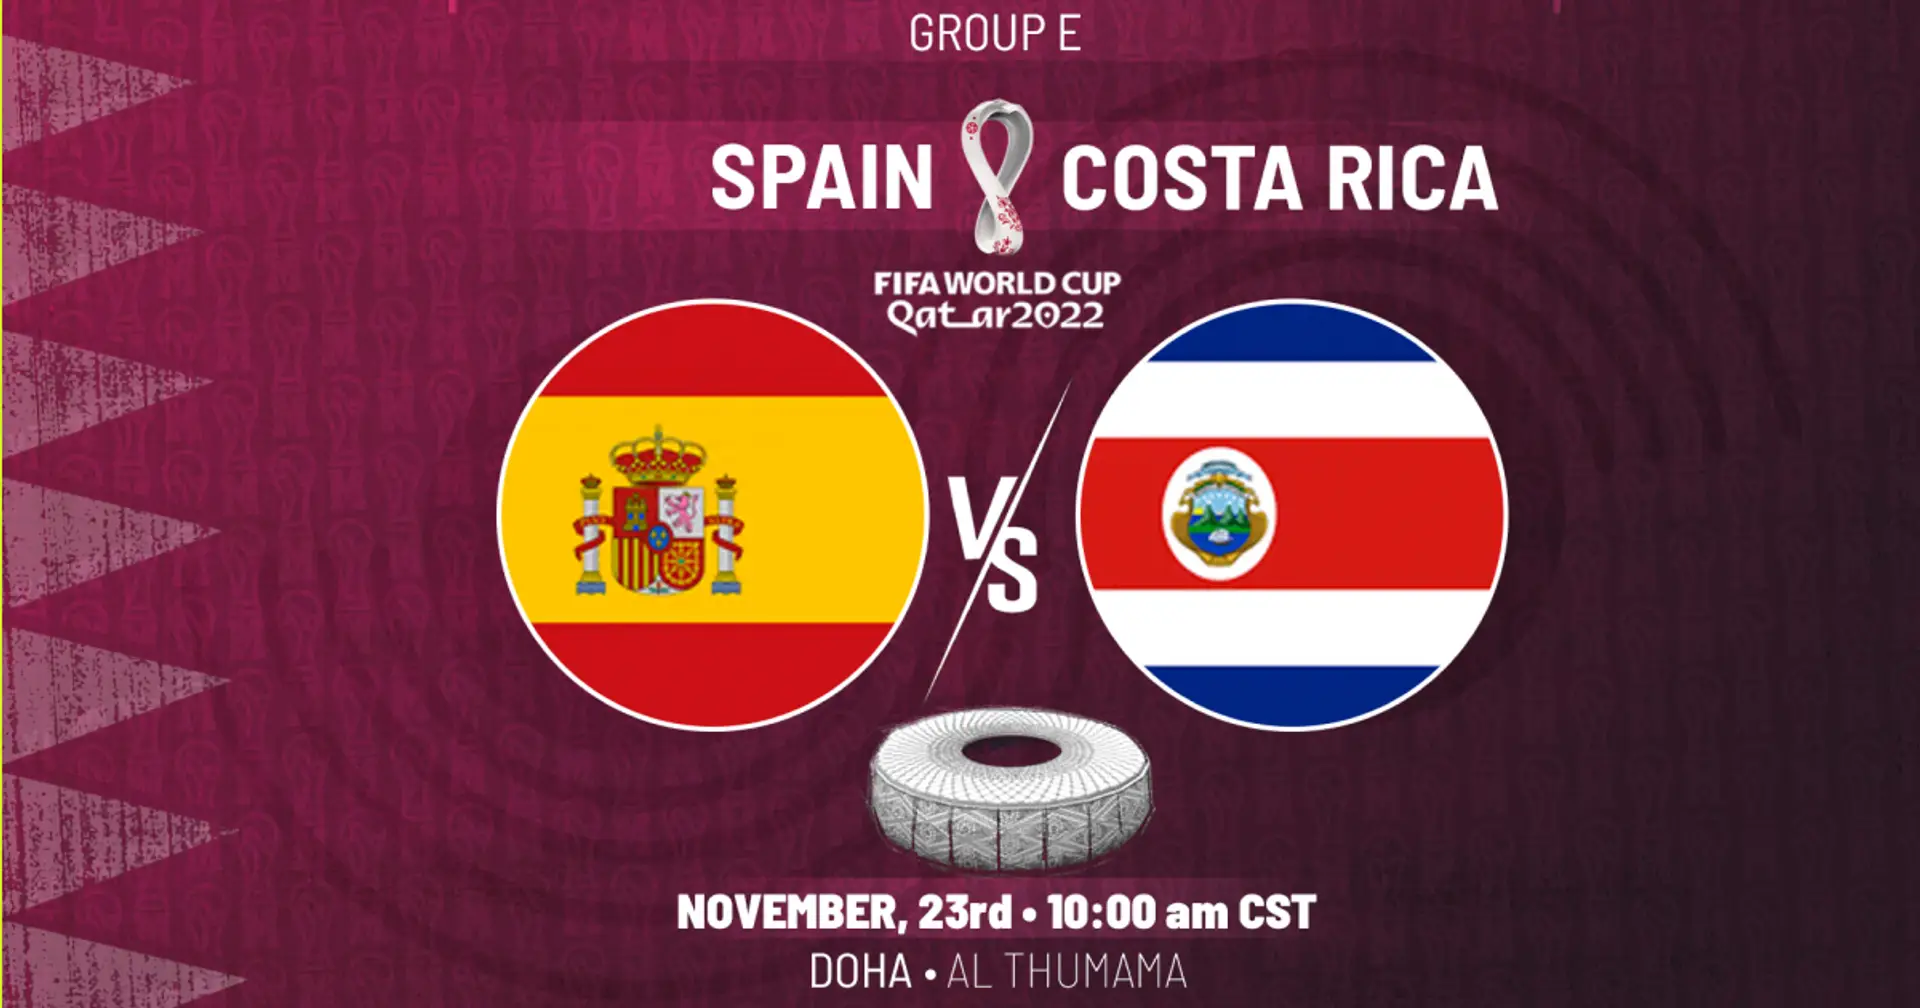 Spain vs Costa Rica: Official team lineups for the World Cup clash revealed